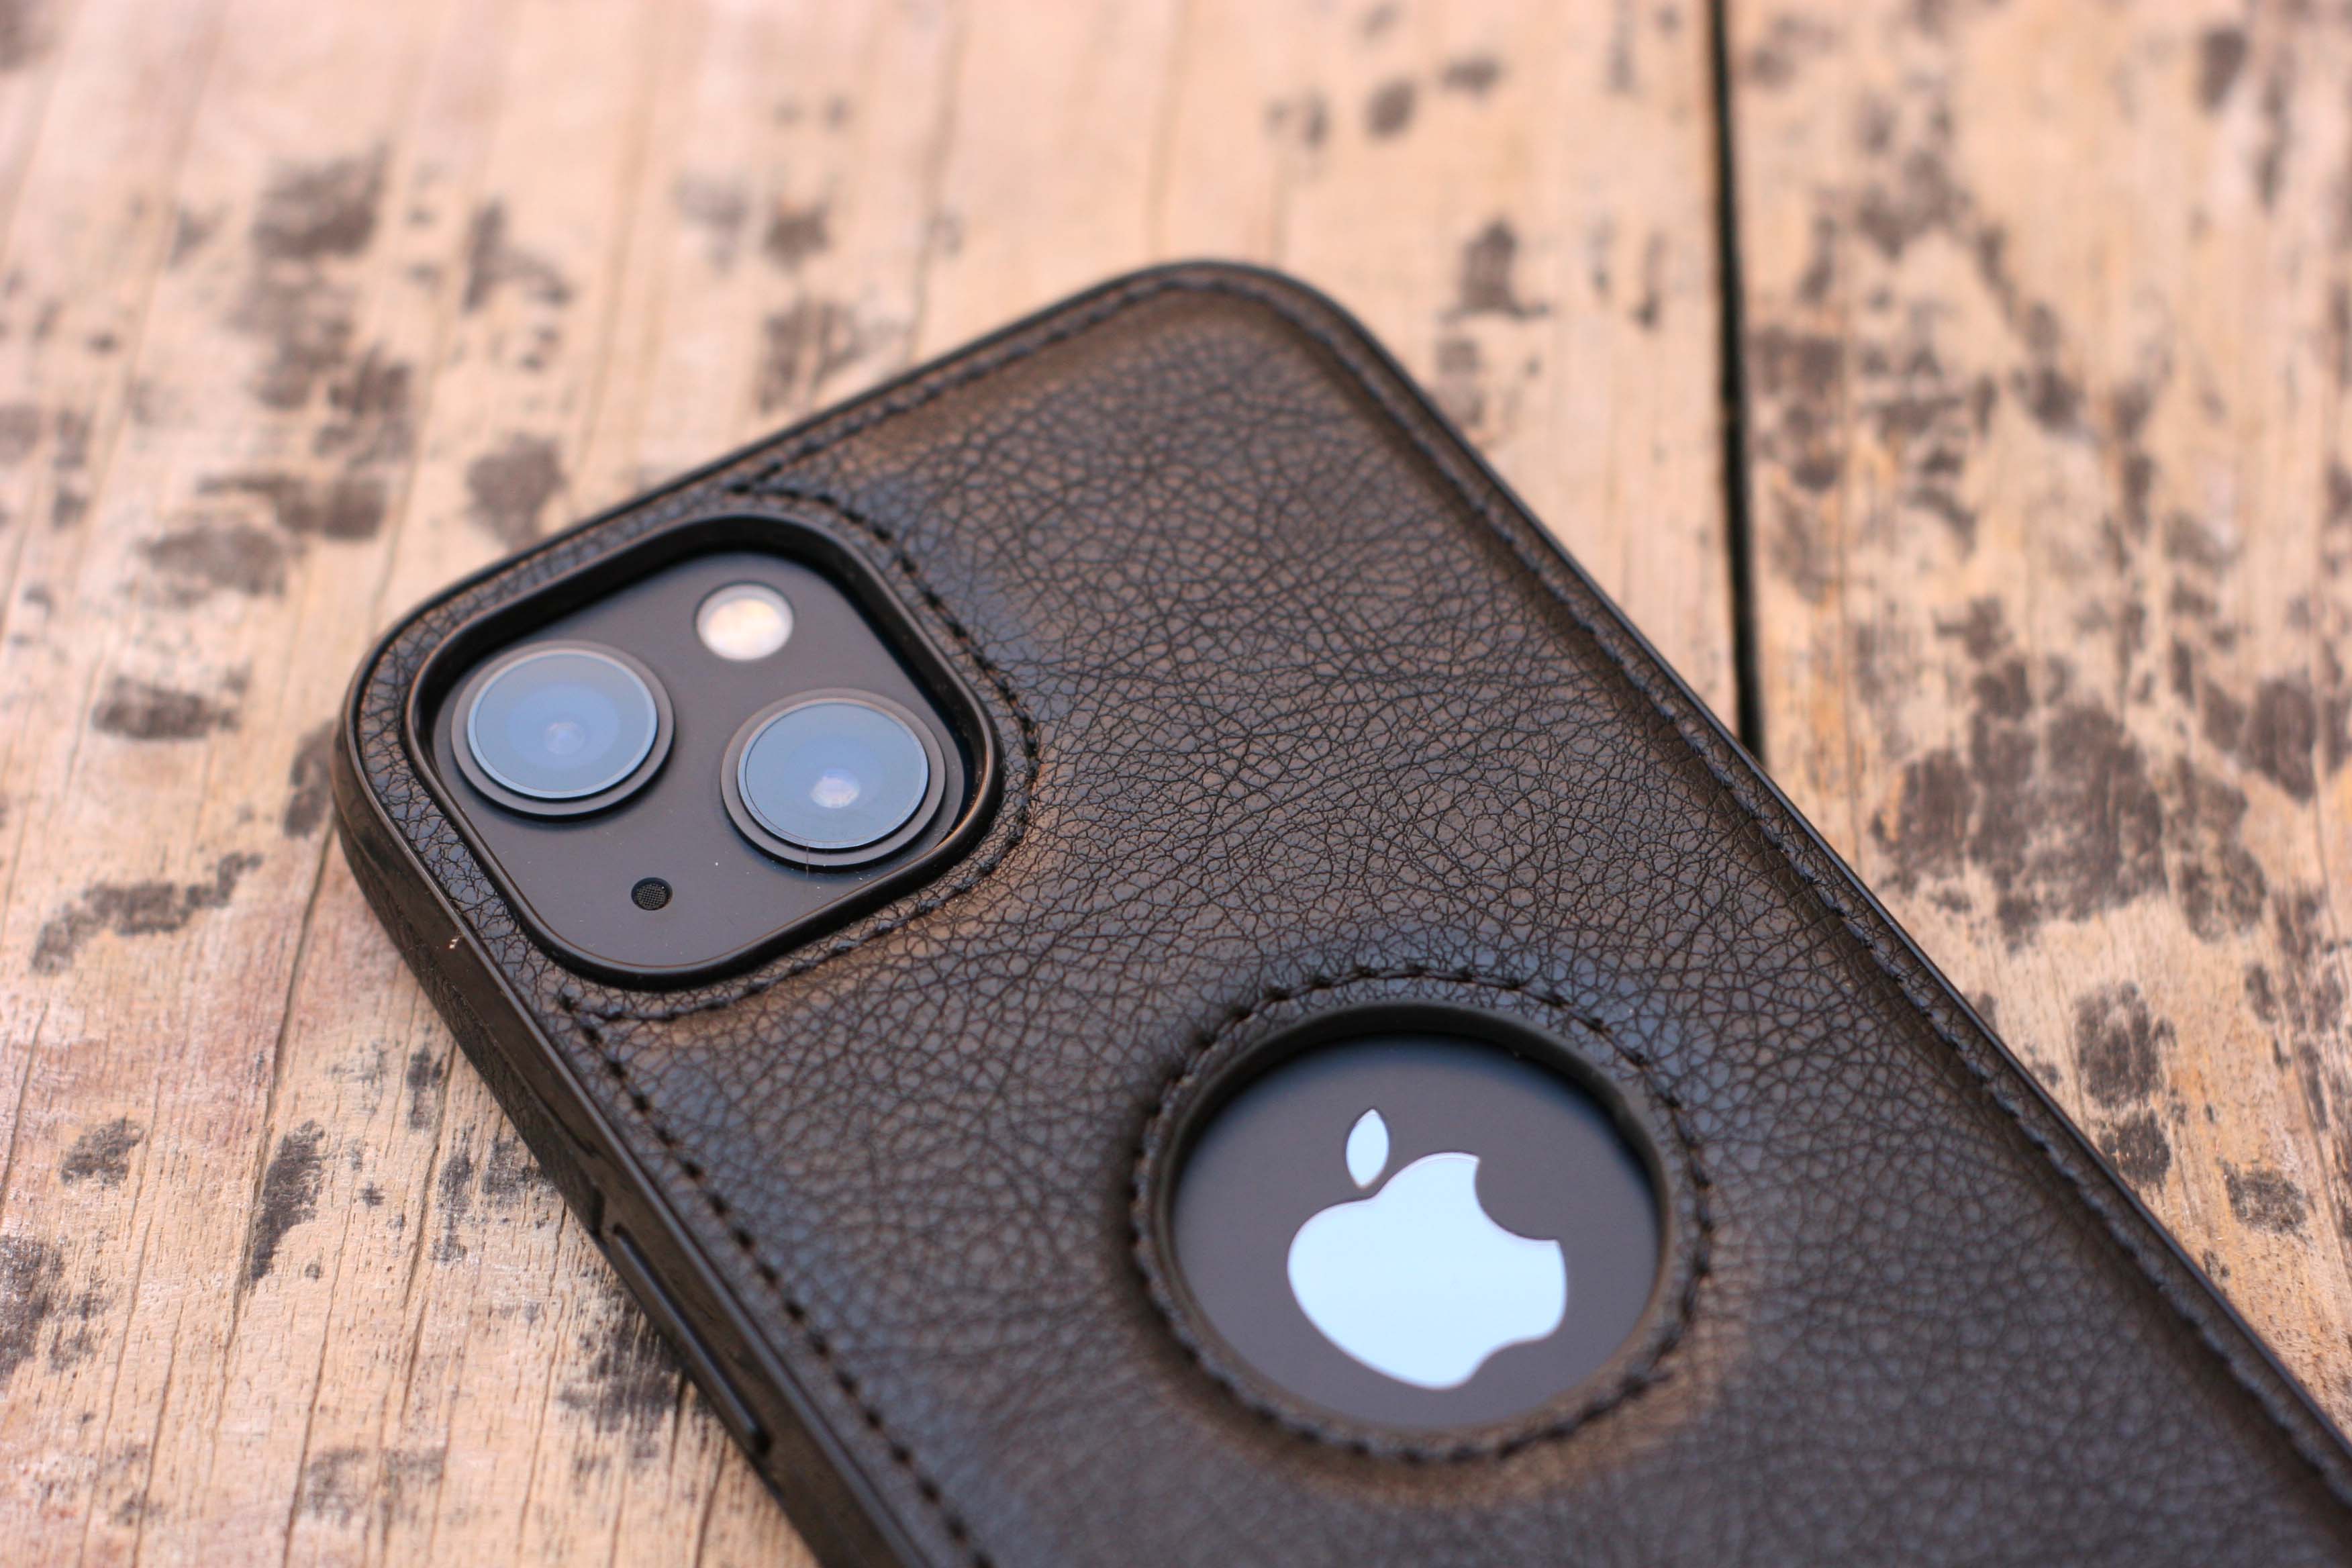 BLACK LEATHER PHONE CASE WITH APPLE LOGO